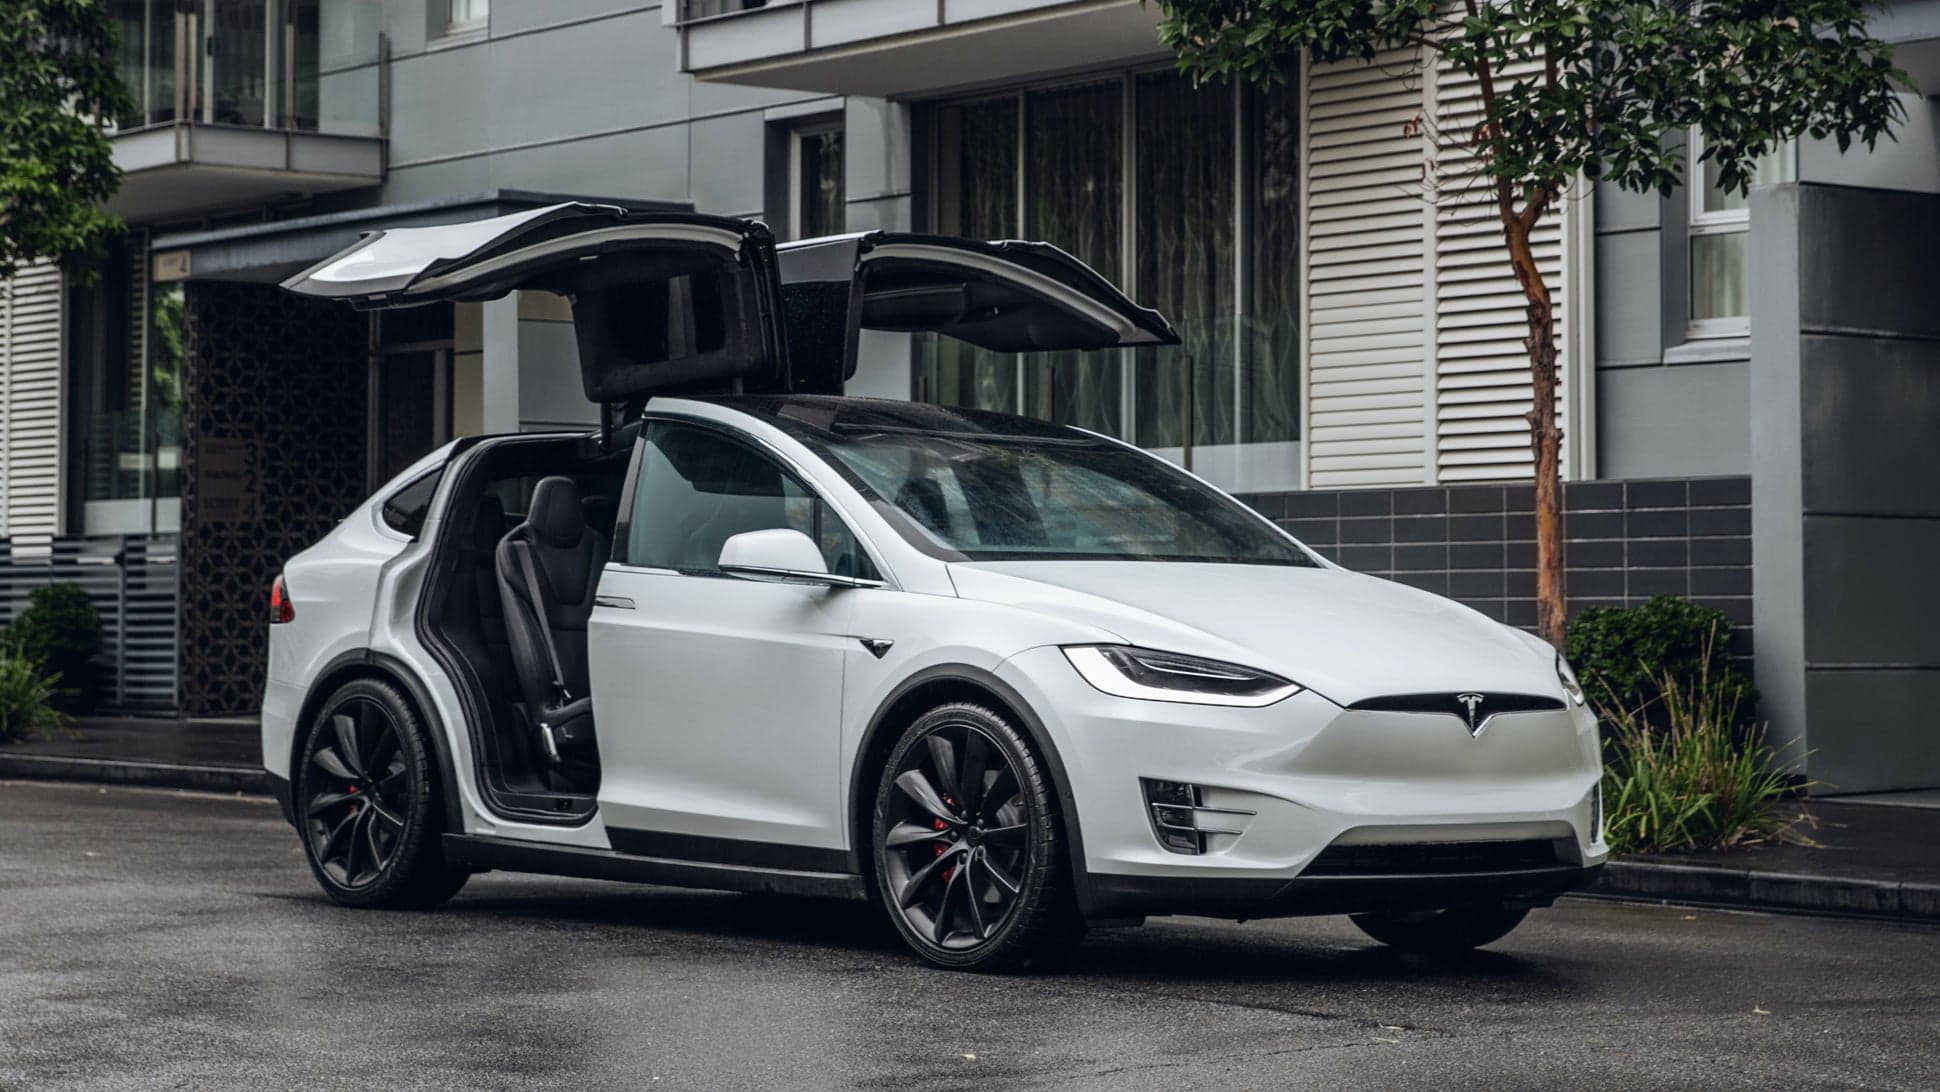 Refreshed Versions of Tesla Model S, Model X Won’t Happen Anytime Soon